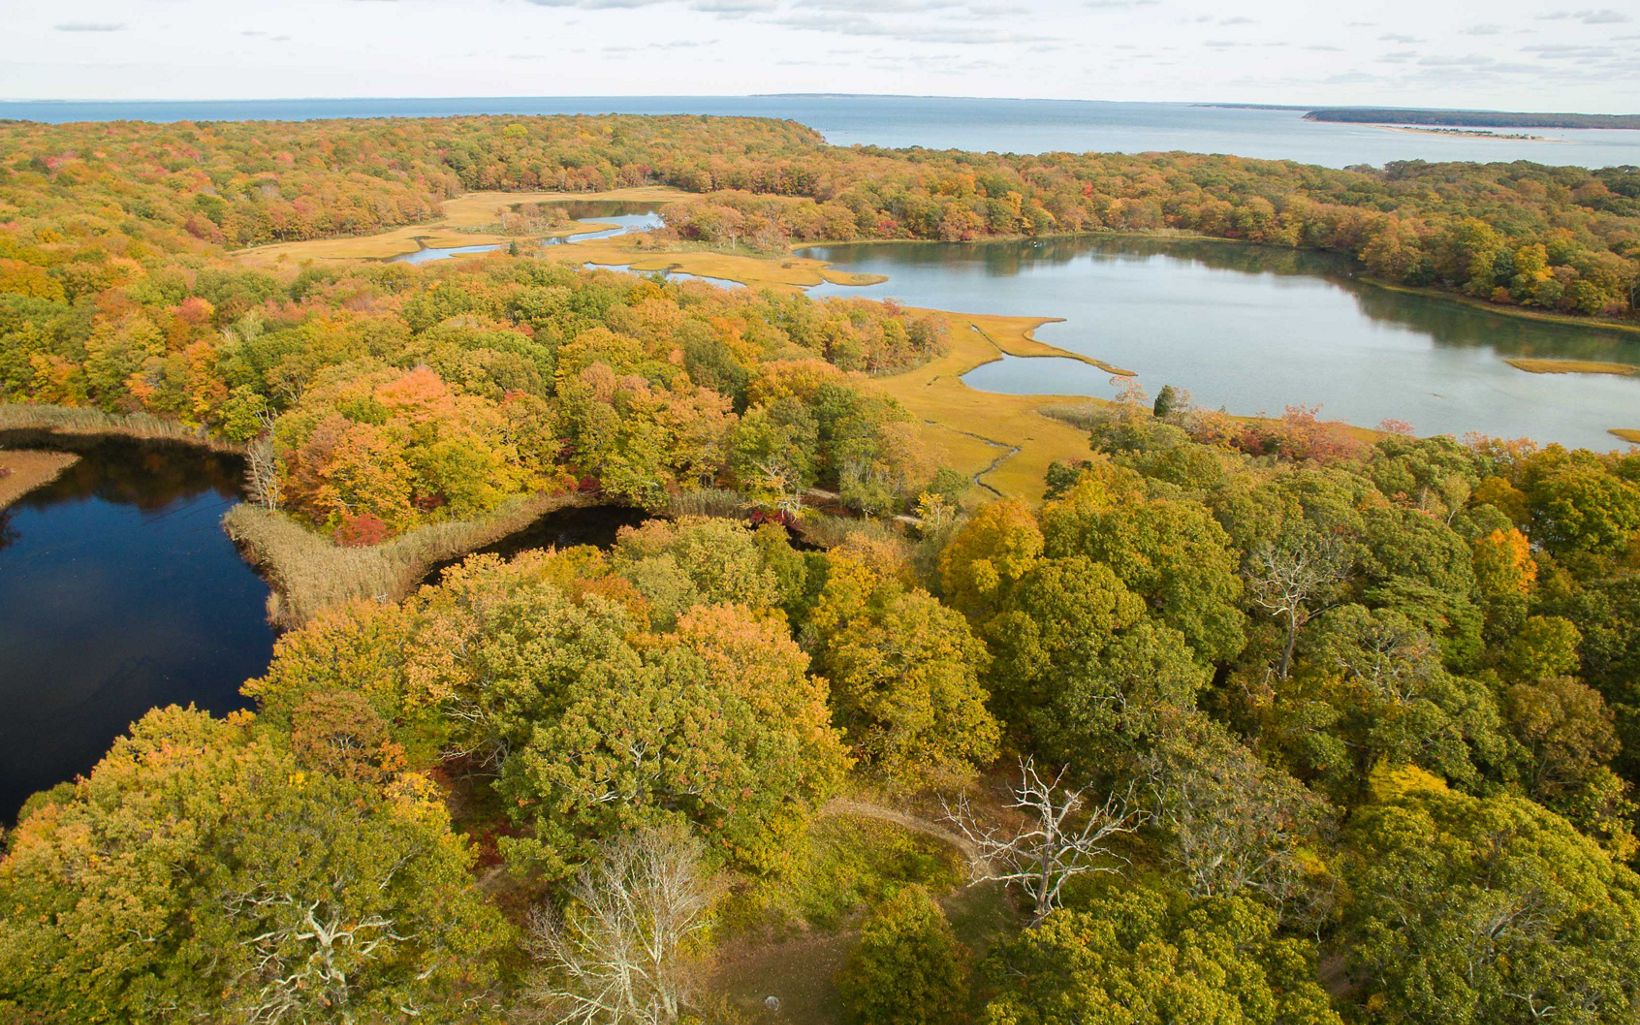 Aerial view of trees in fall color along the shore of several small ponds or lagoons with a broader shoreline in the distance.